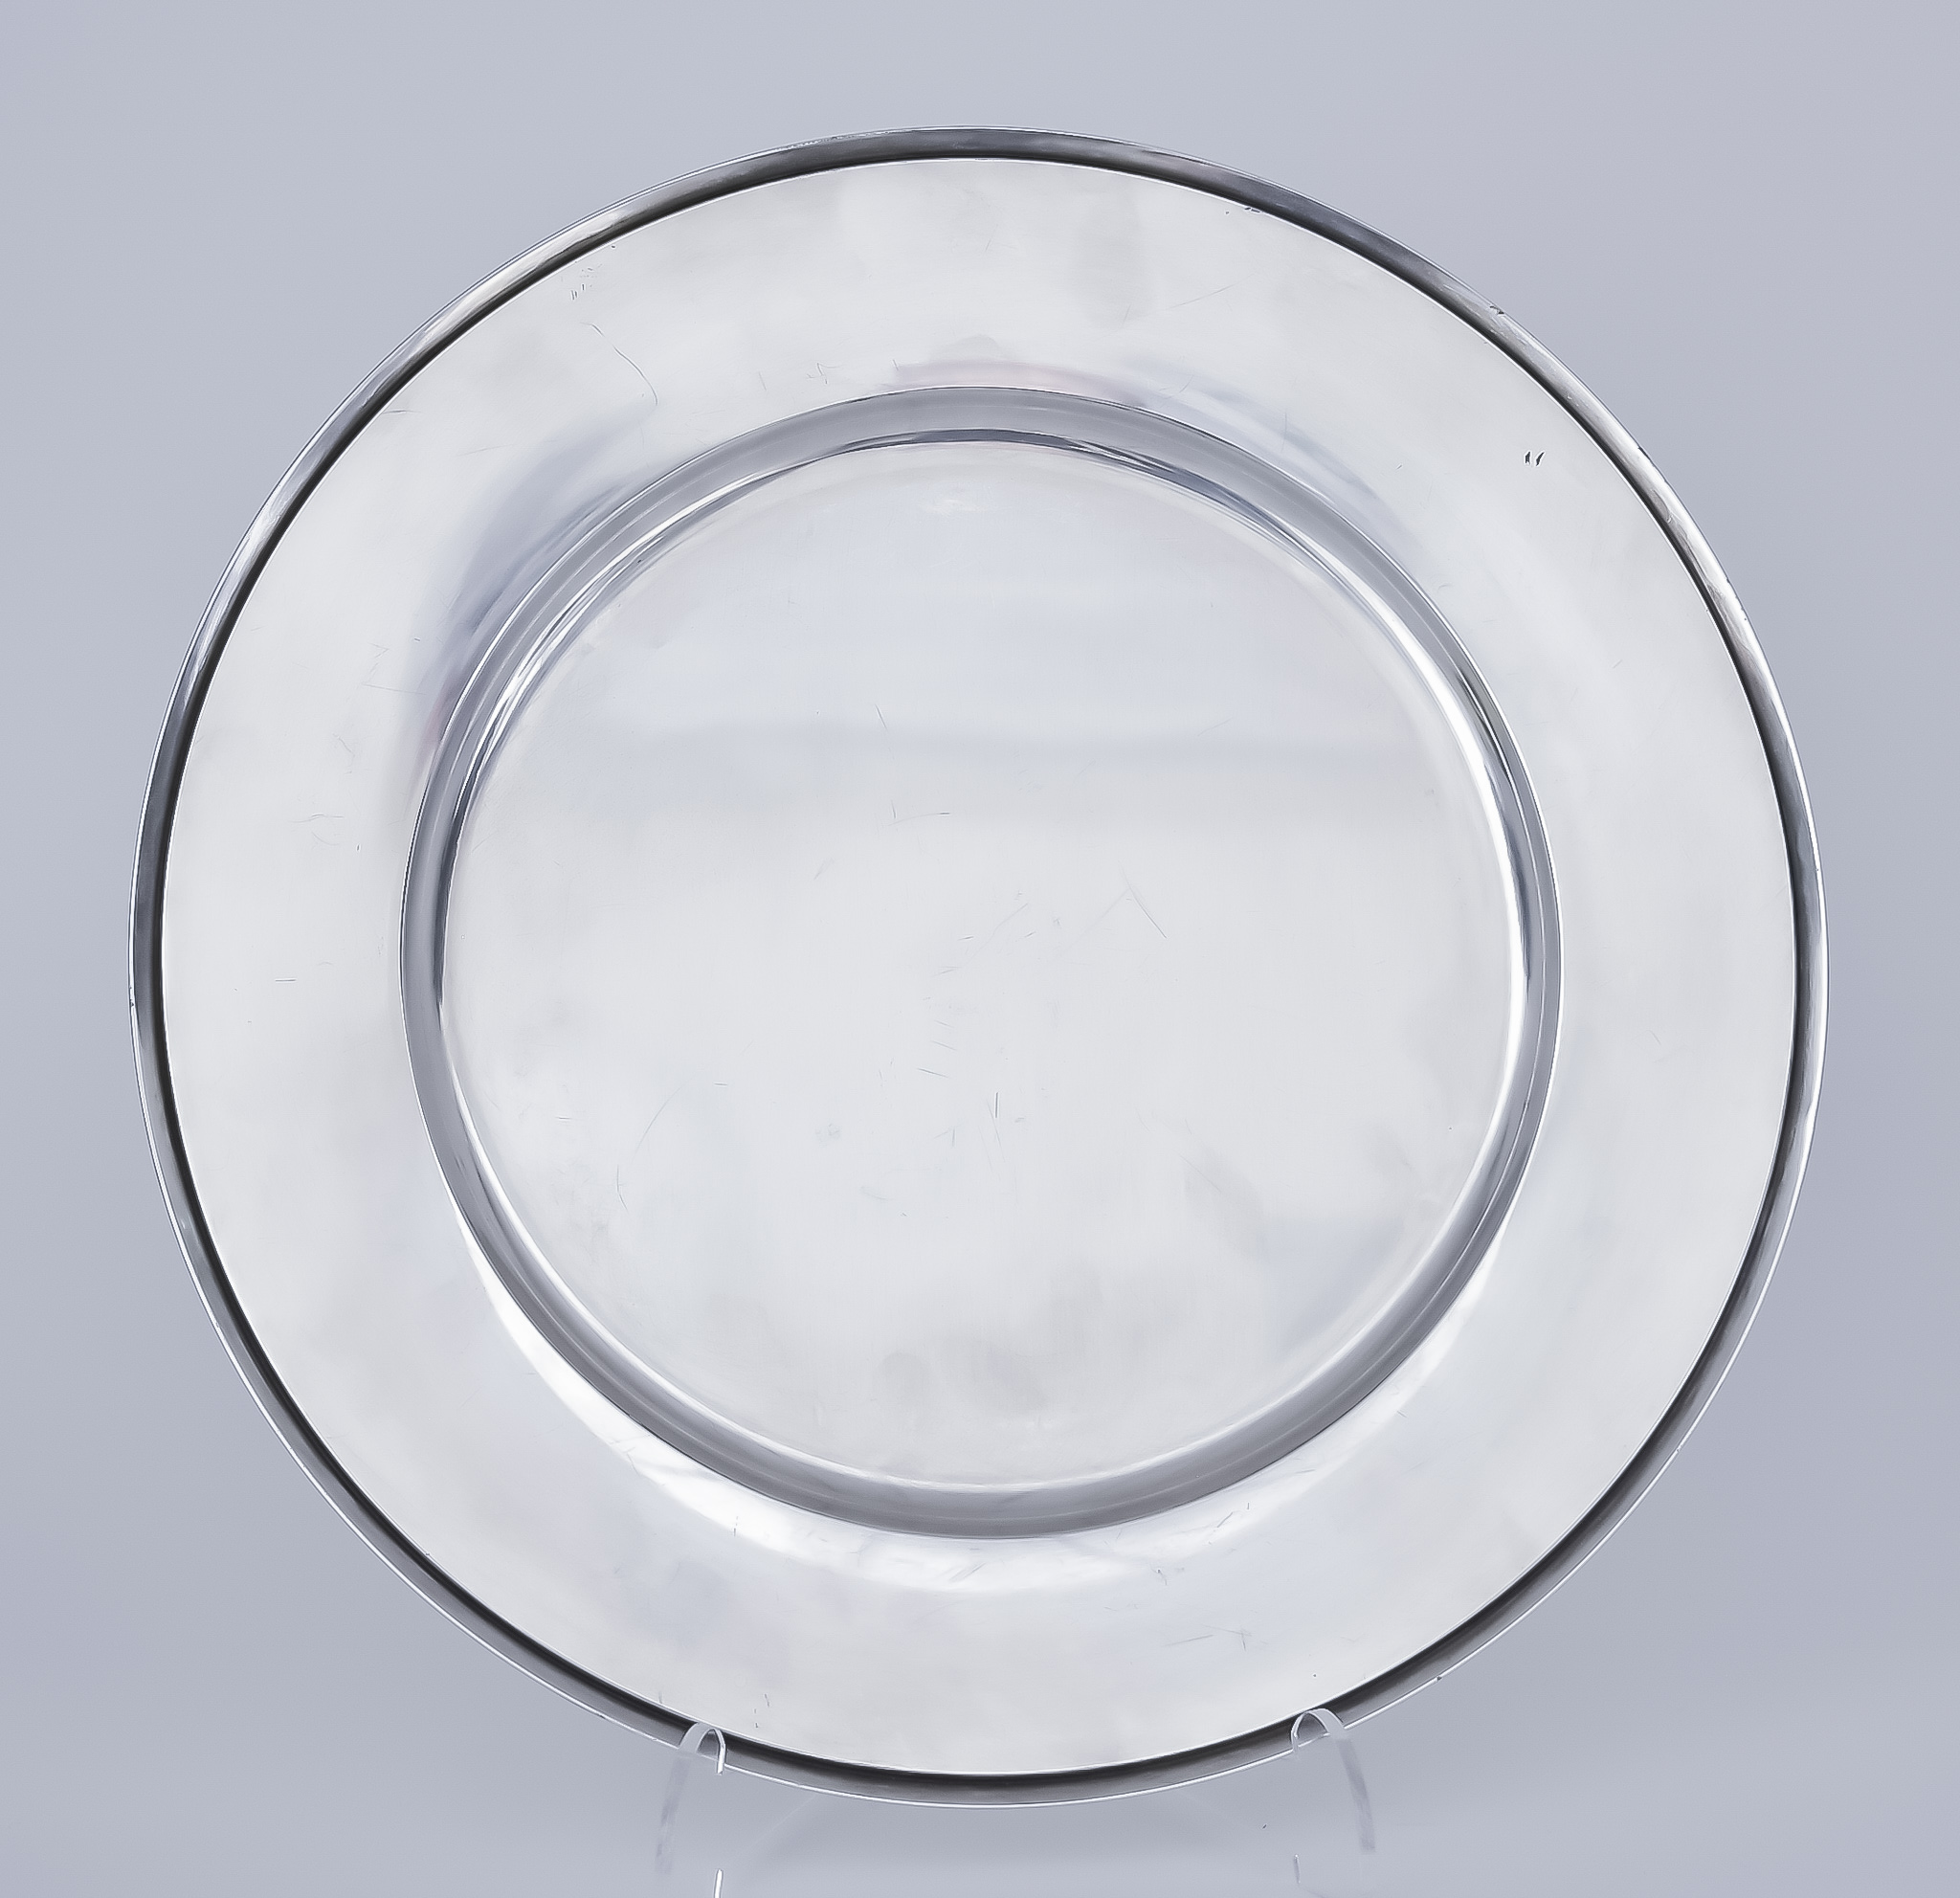 A 20th Century Danish Sterling Silver Circular Plate by Georg Jensen, Copenhagen and designed by